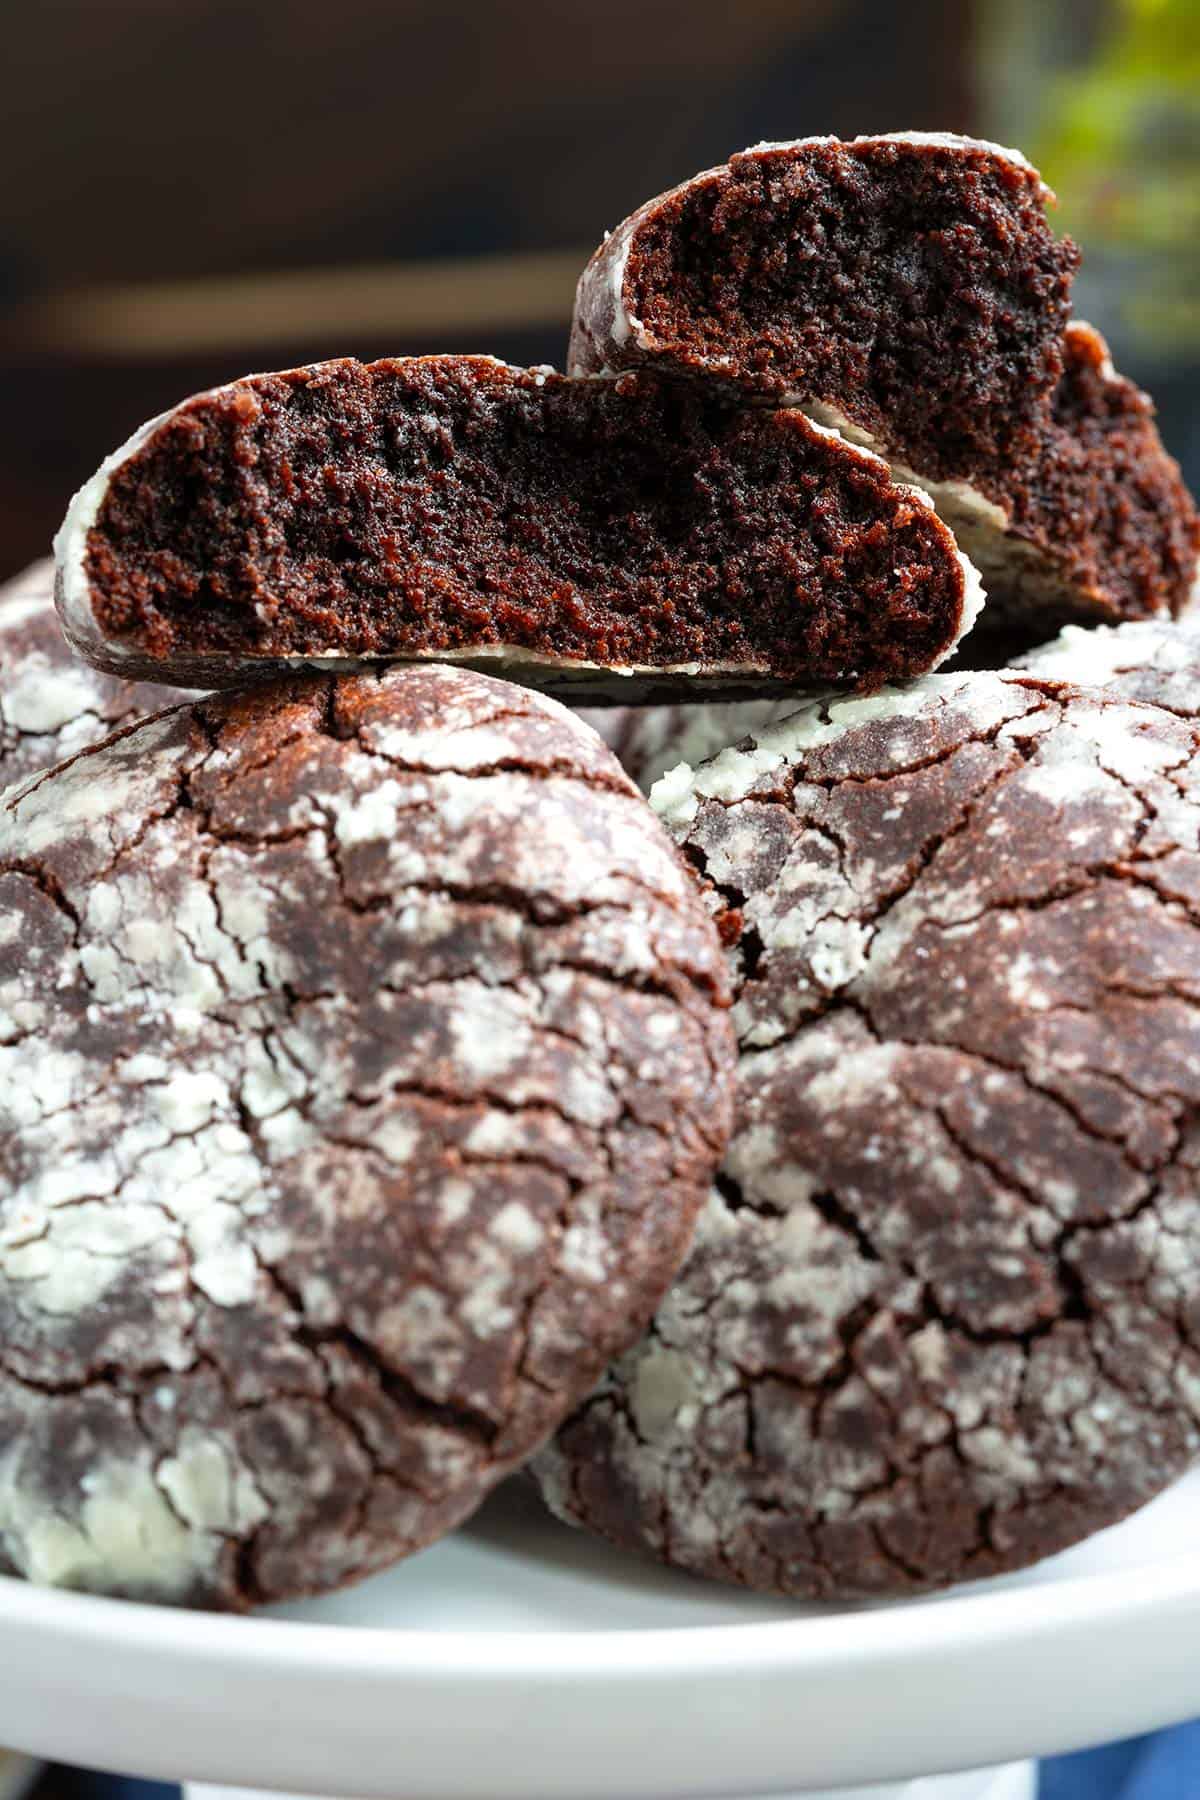 Full photo of the Mexican chocolate Crinkle Cookies laying on a plate with the top cookie split in half to see the rich chocolate inside.